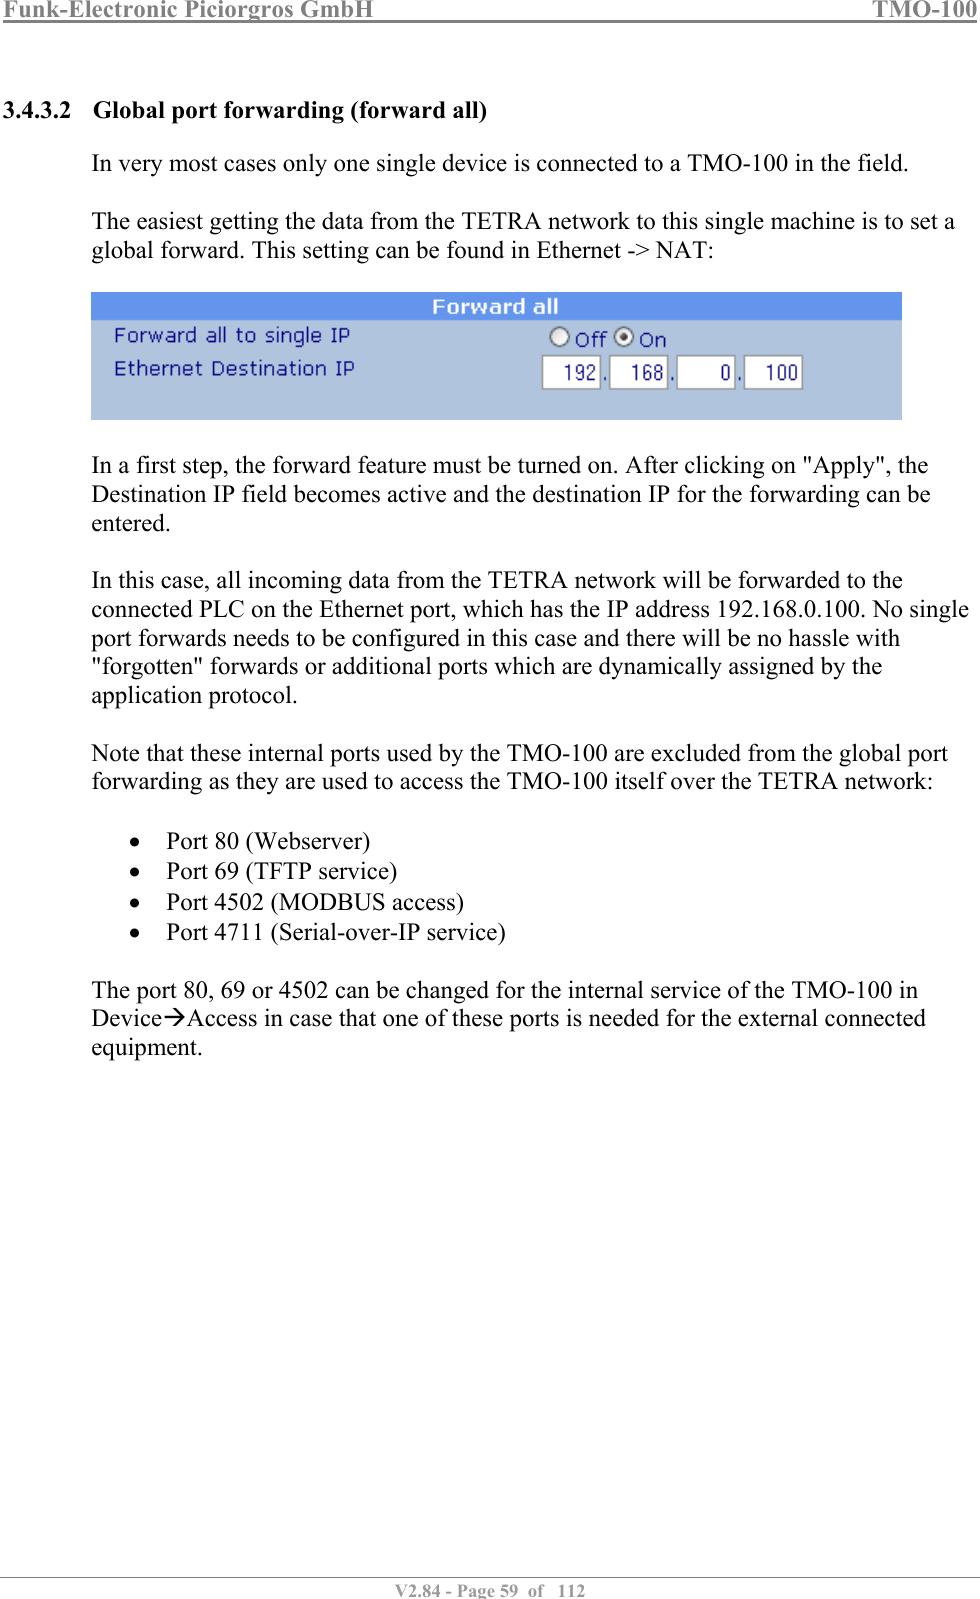 Funk-Electronic Piciorgros GmbH   TMO-100   V2.84 - Page 59  of   112   3.4.3.2 Global port forwarding (forward all) In very most cases only one single device is connected to a TMO-100 in the field.  The easiest getting the data from the TETRA network to this single machine is to set a global forward. This setting can be found in Ethernet -&gt; NAT:    In a first step, the forward feature must be turned on. After clicking on &quot;Apply&quot;, the Destination IP field becomes active and the destination IP for the forwarding can be entered.  In this case, all incoming data from the TETRA network will be forwarded to the connected PLC on the Ethernet port, which has the IP address 192.168.0.100. No single port forwards needs to be configured in this case and there will be no hassle with &quot;forgotten&quot; forwards or additional ports which are dynamically assigned by the application protocol.  Note that these internal ports used by the TMO-100 are excluded from the global port forwarding as they are used to access the TMO-100 itself over the TETRA network:   Port 80 (Webserver)  Port 69 (TFTP service)  Port 4502 (MODBUS access)  Port 4711 (Serial-over-IP service)  The port 80, 69 or 4502 can be changed for the internal service of the TMO-100 in DeviceAccess in case that one of these ports is needed for the external connected equipment.     